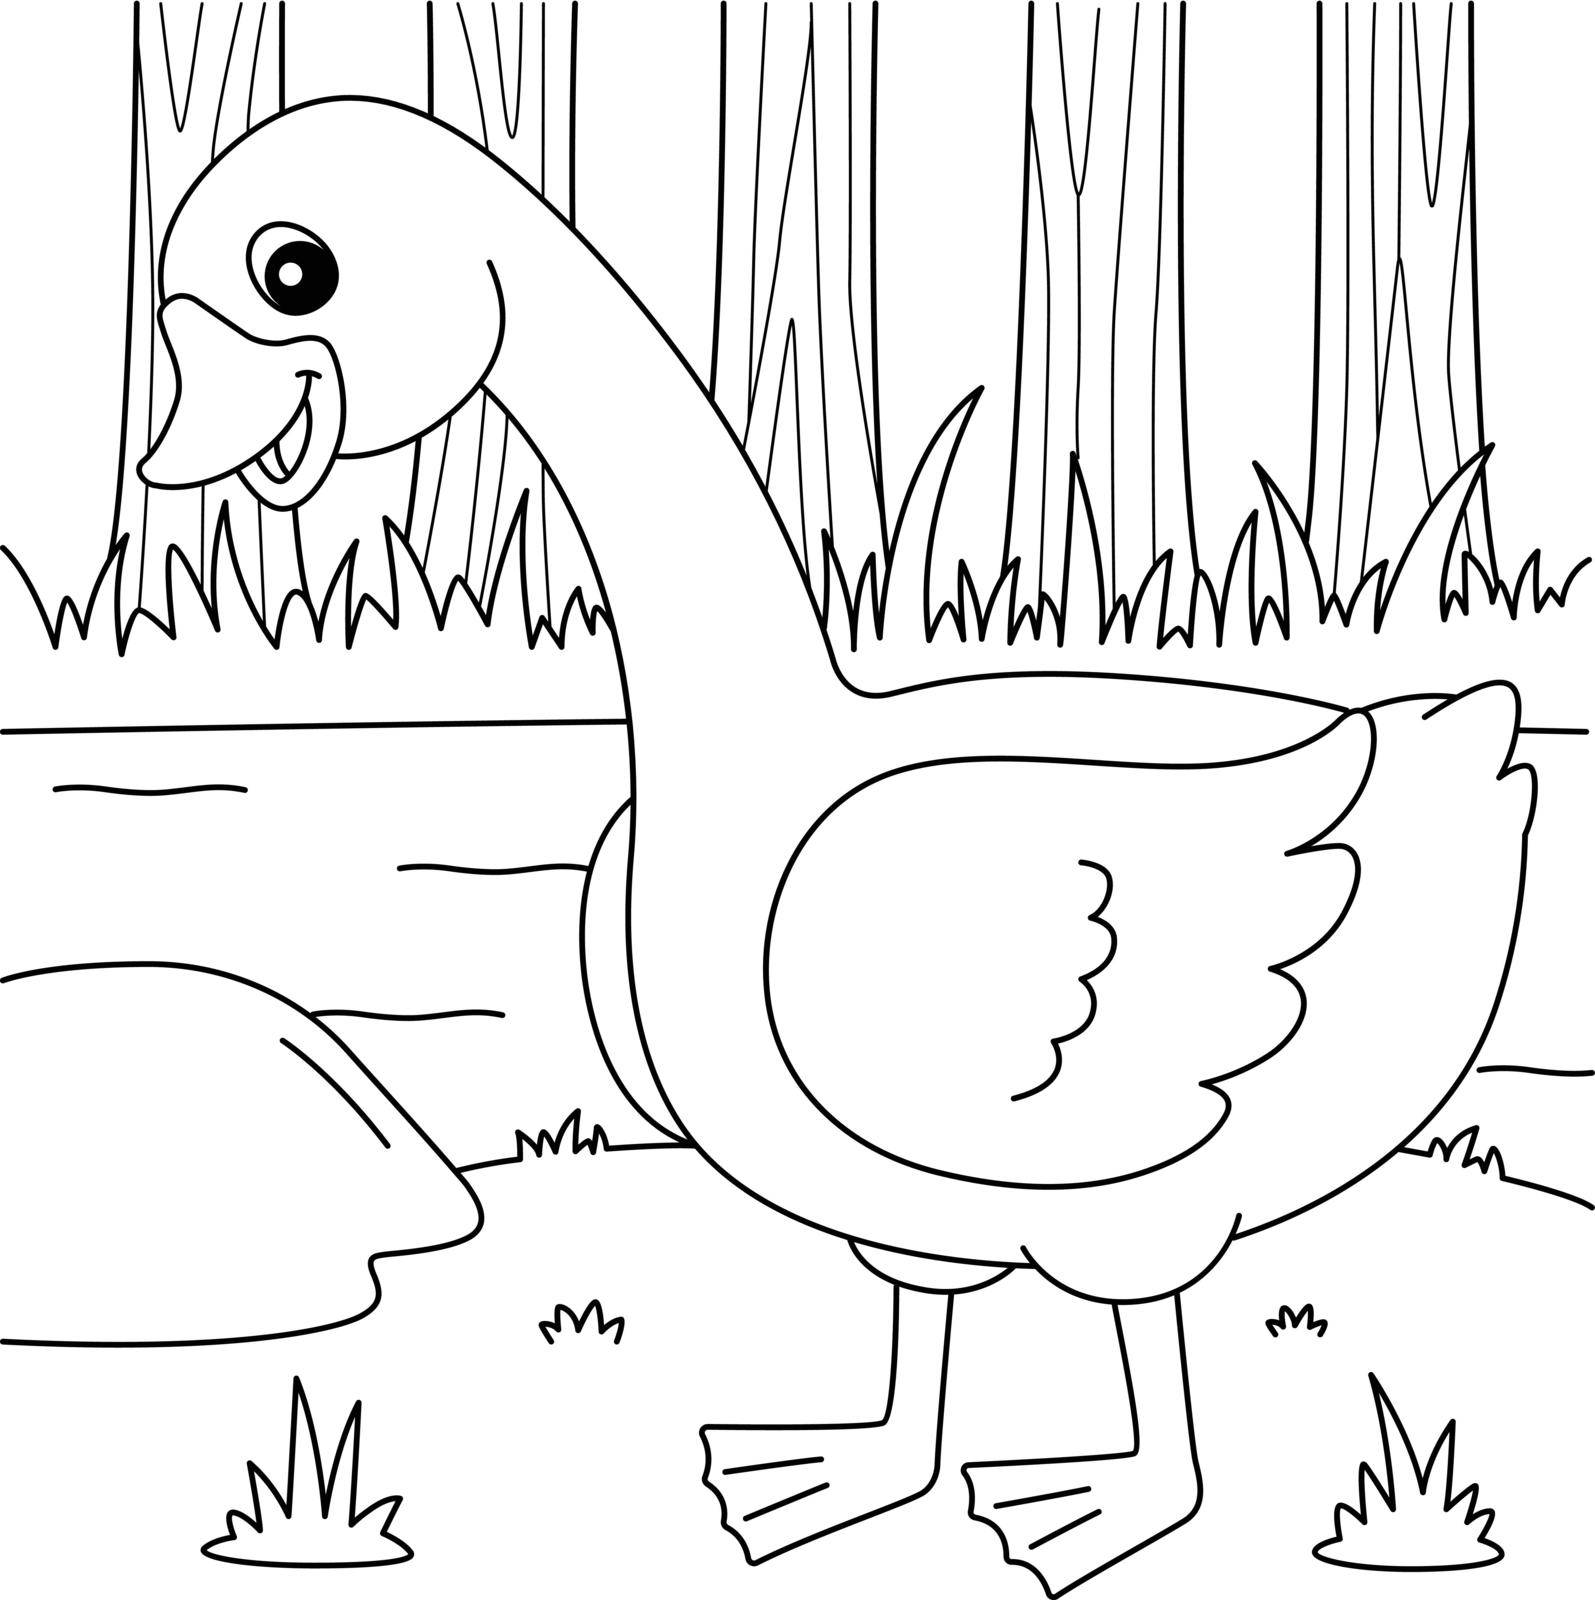 A cute and funny coloring page of a goose farm animal. Provides hours of coloring fun for children. To color, this page is very easy. Suitable for little kids and toddlers.